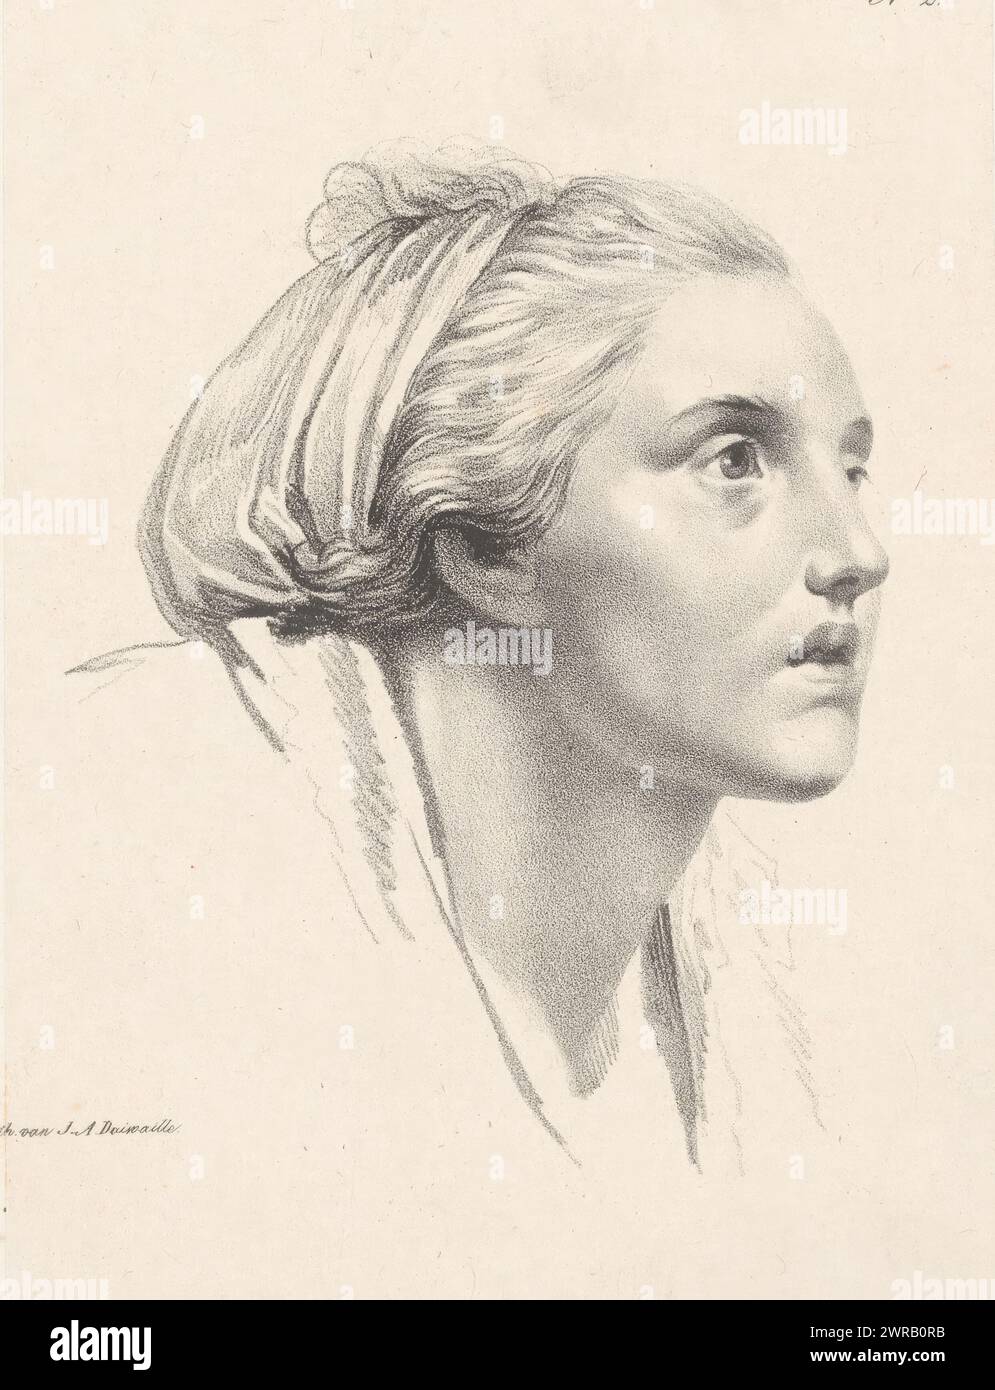 Young woman with headscarf, Passions after J.B. Greuze Number Two (series title), The woman looks to the right. The hair that peeks out from under her headscarf blows back. Numbered top right: 'No. 2'. This print is part of a cover with thirty prints., print maker: Jean Augustin Daiwaille, printer: Jean Augustin Daiwaille, Amsterdam, 1820 - 1830, paper, height 335 mm × width 280 mm, print Stock Photo